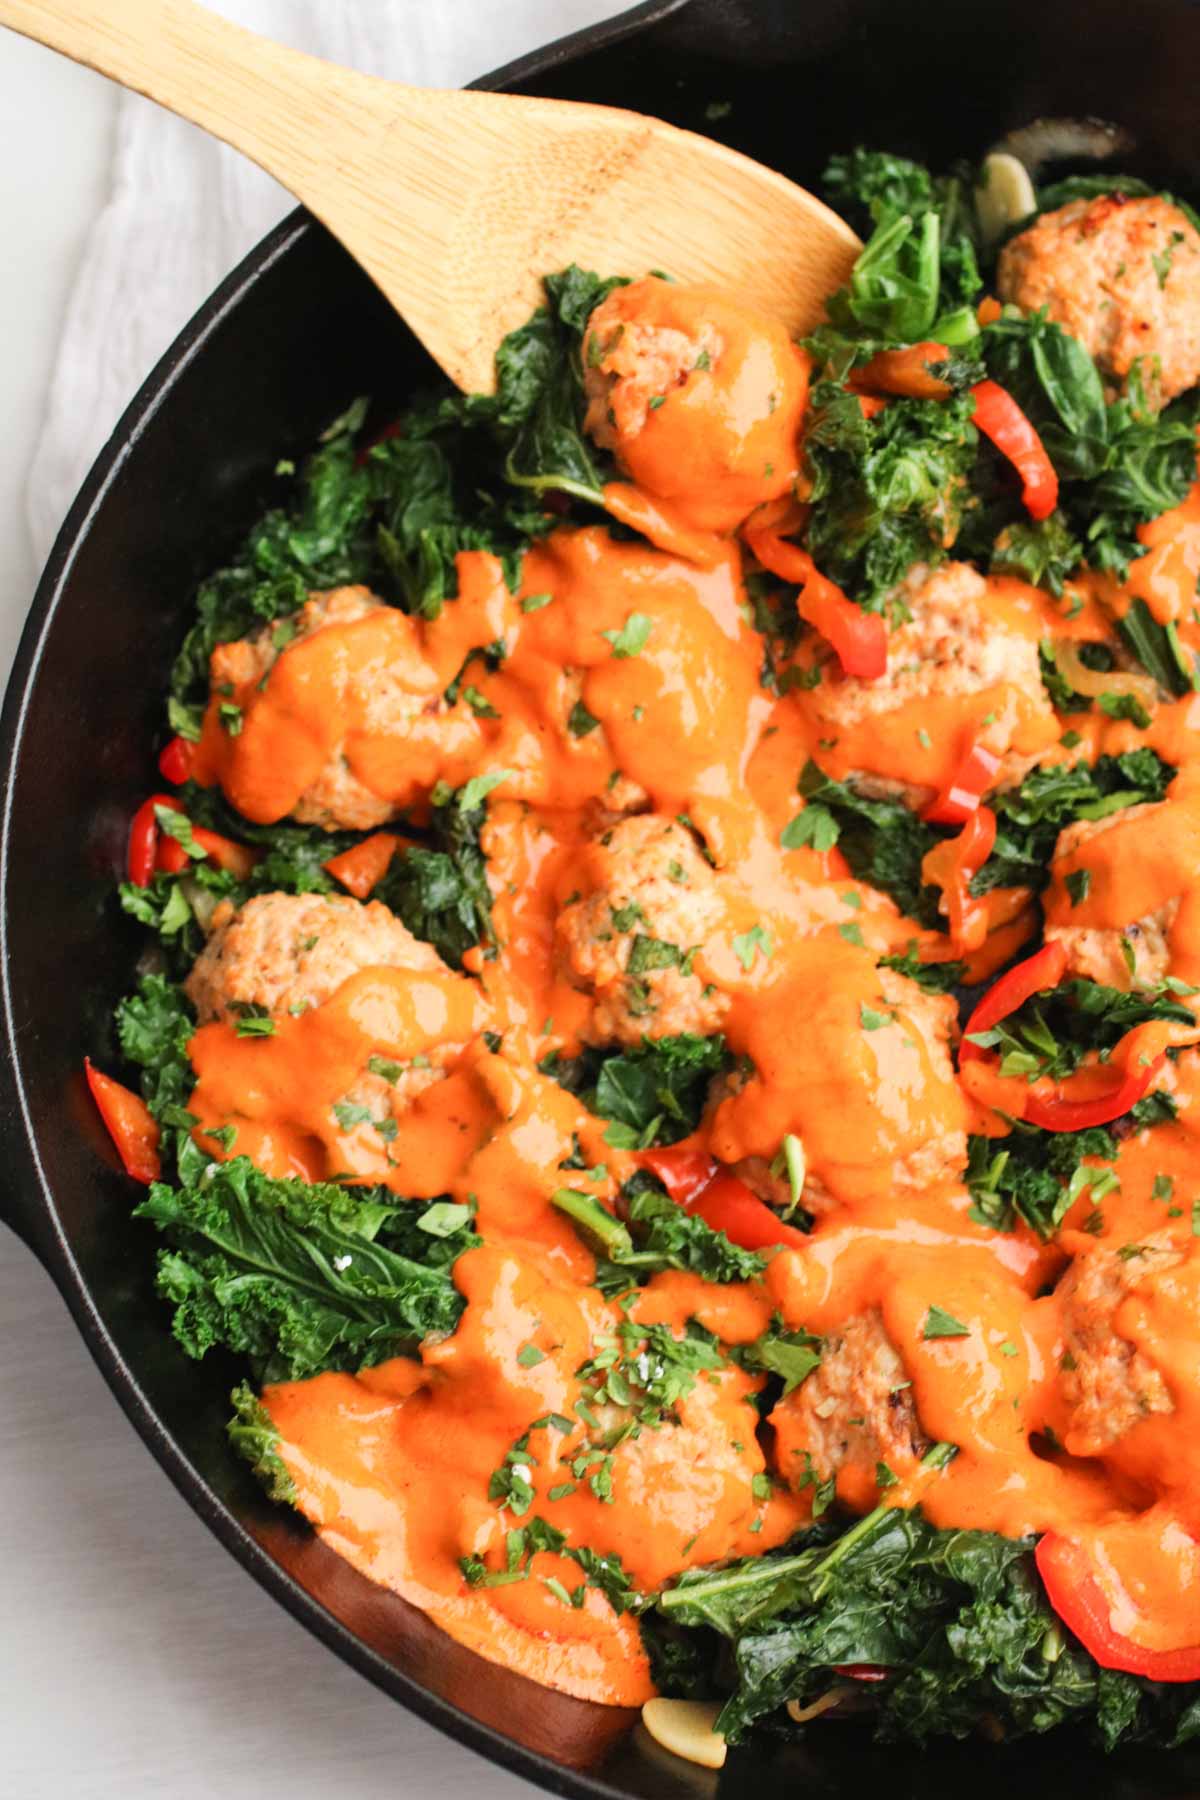 The best chicken meatballs in a creamy roasted red pepper sauce with sauteed kale. Oh my! 